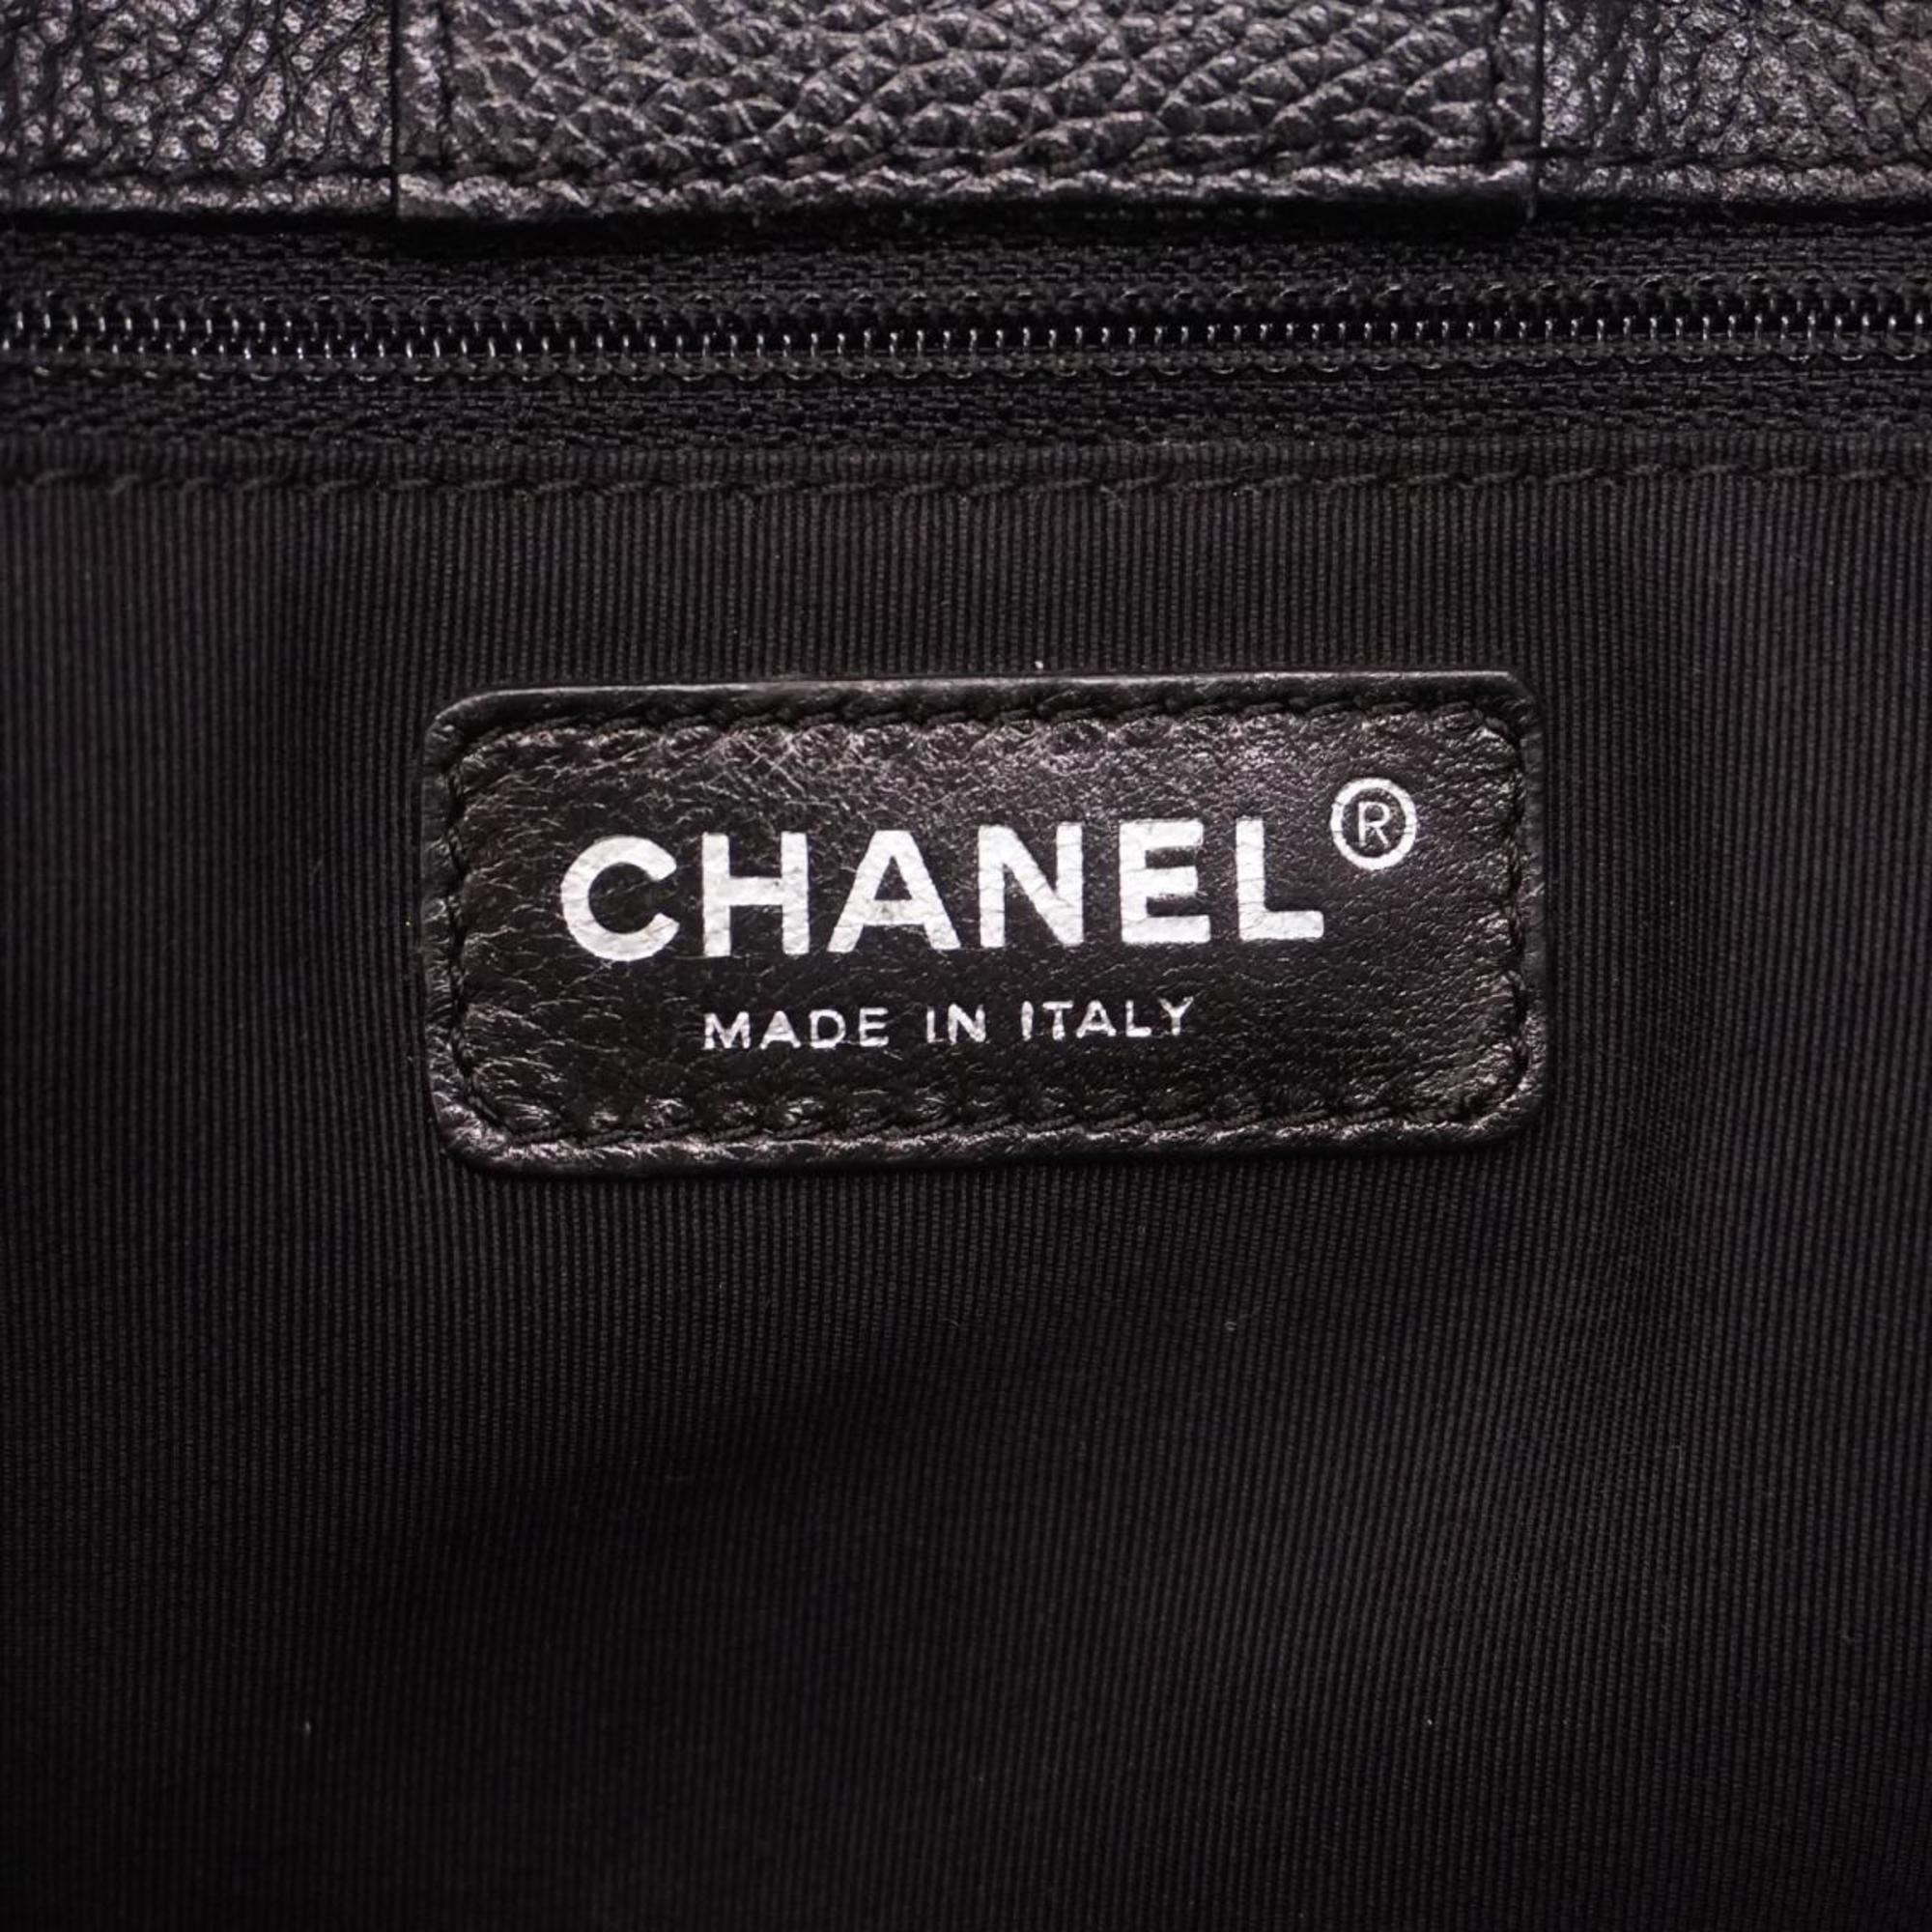 Chanel Tote Bag Executive Leather Black Women's